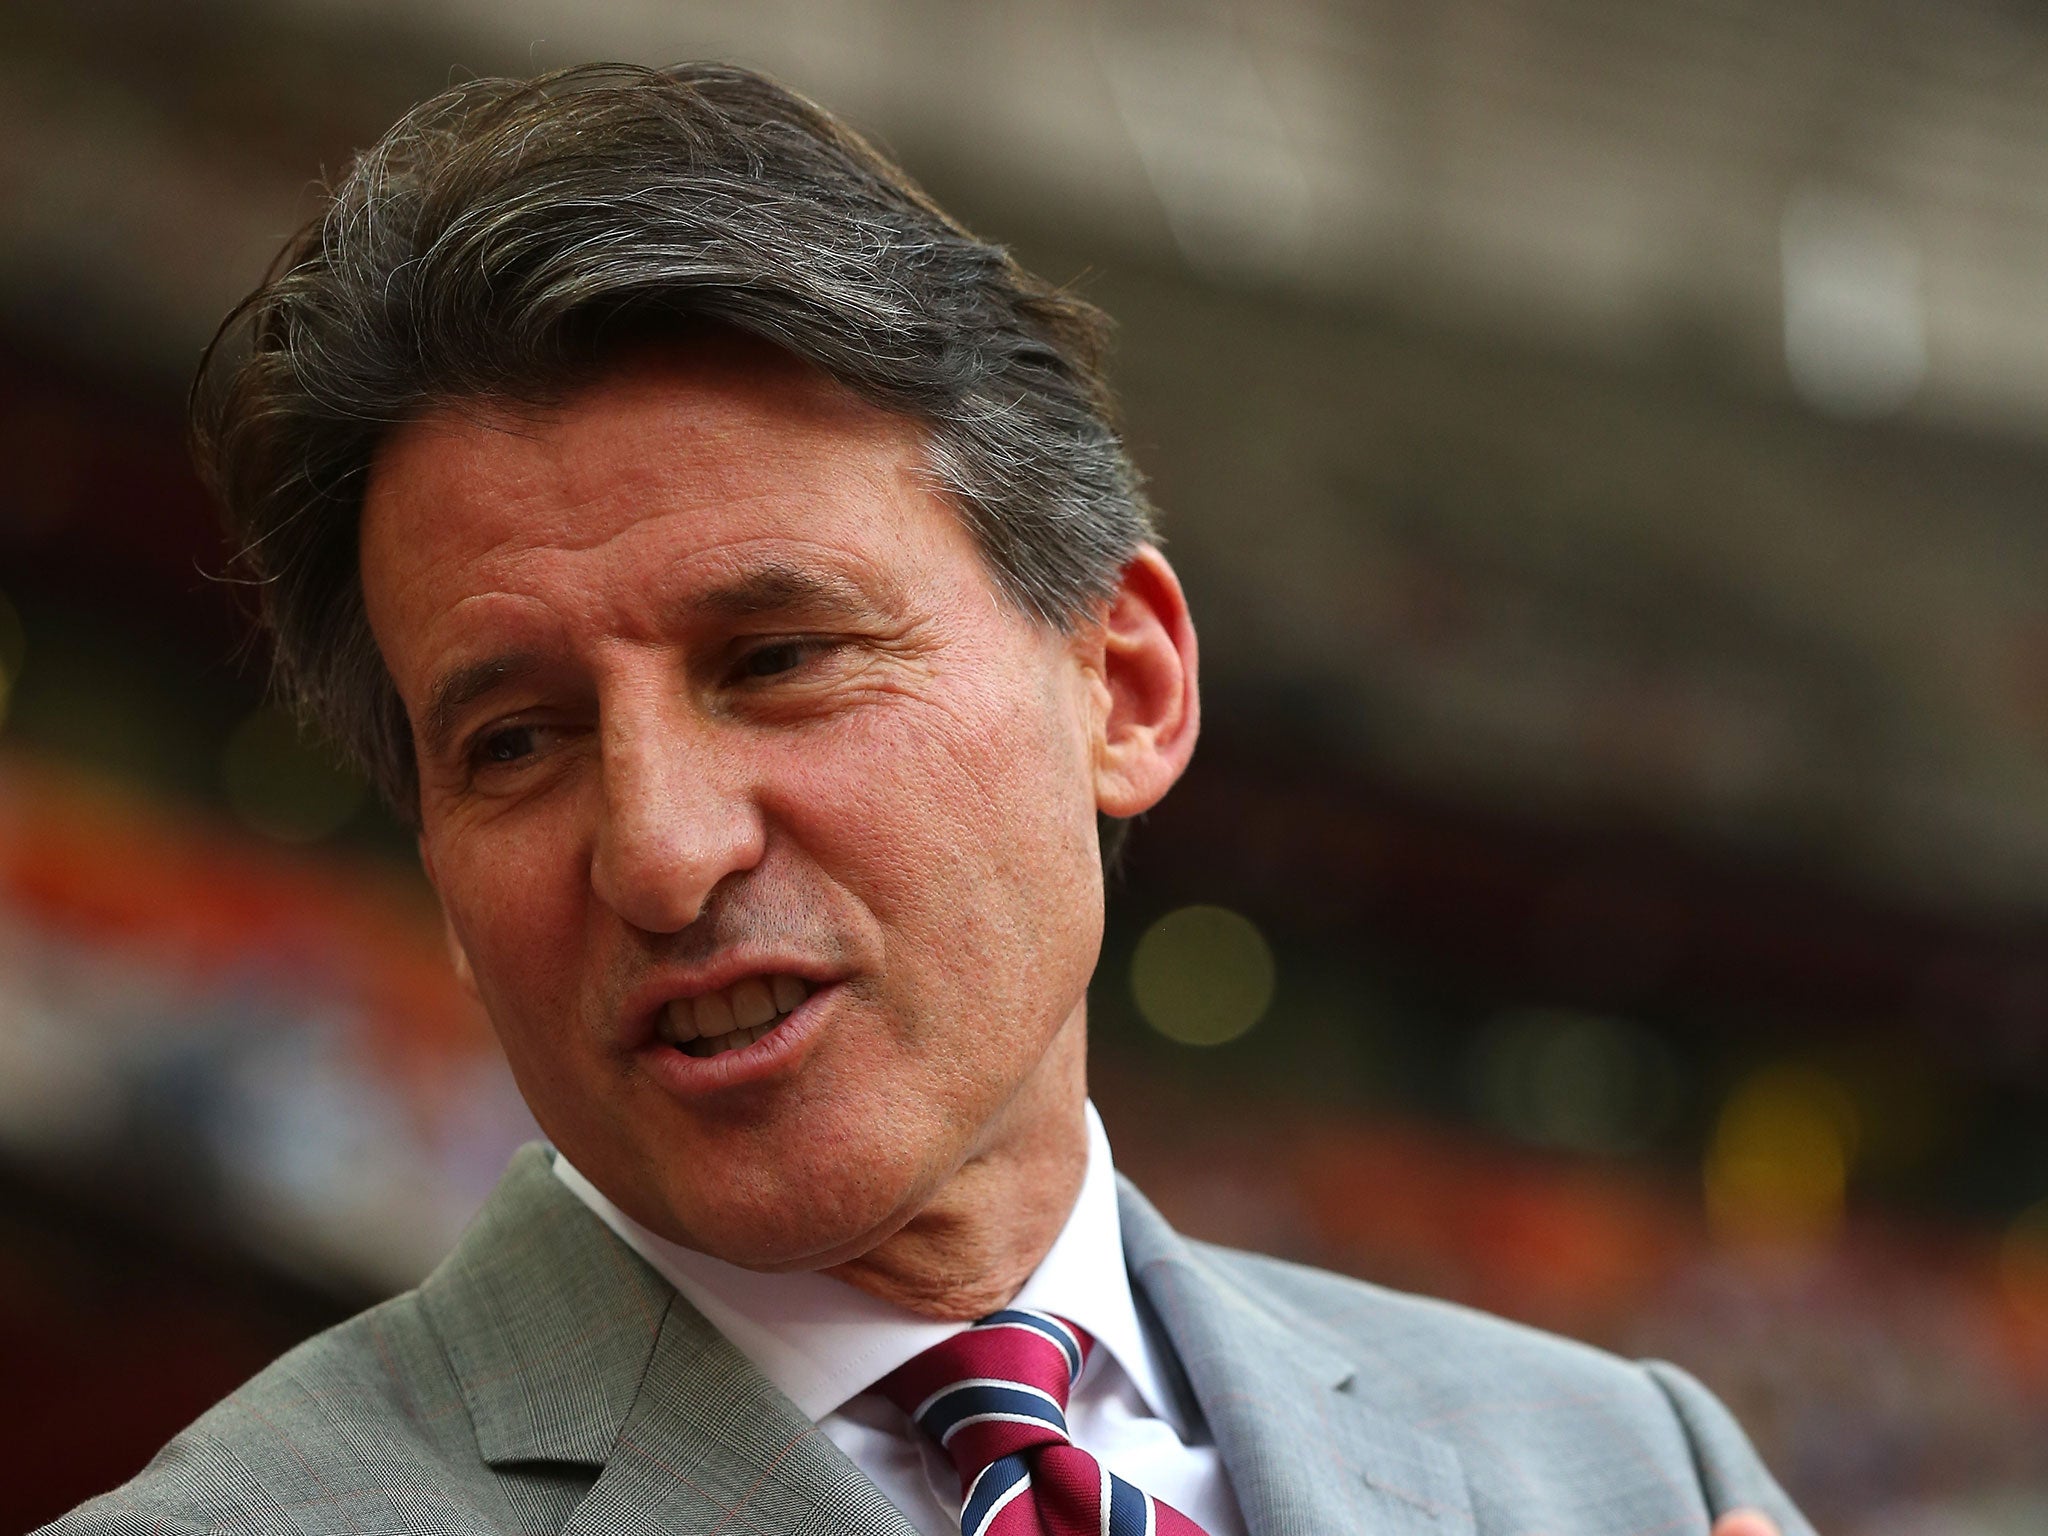 Sebastian Coe has spoken a lot about the need for transparency in the future